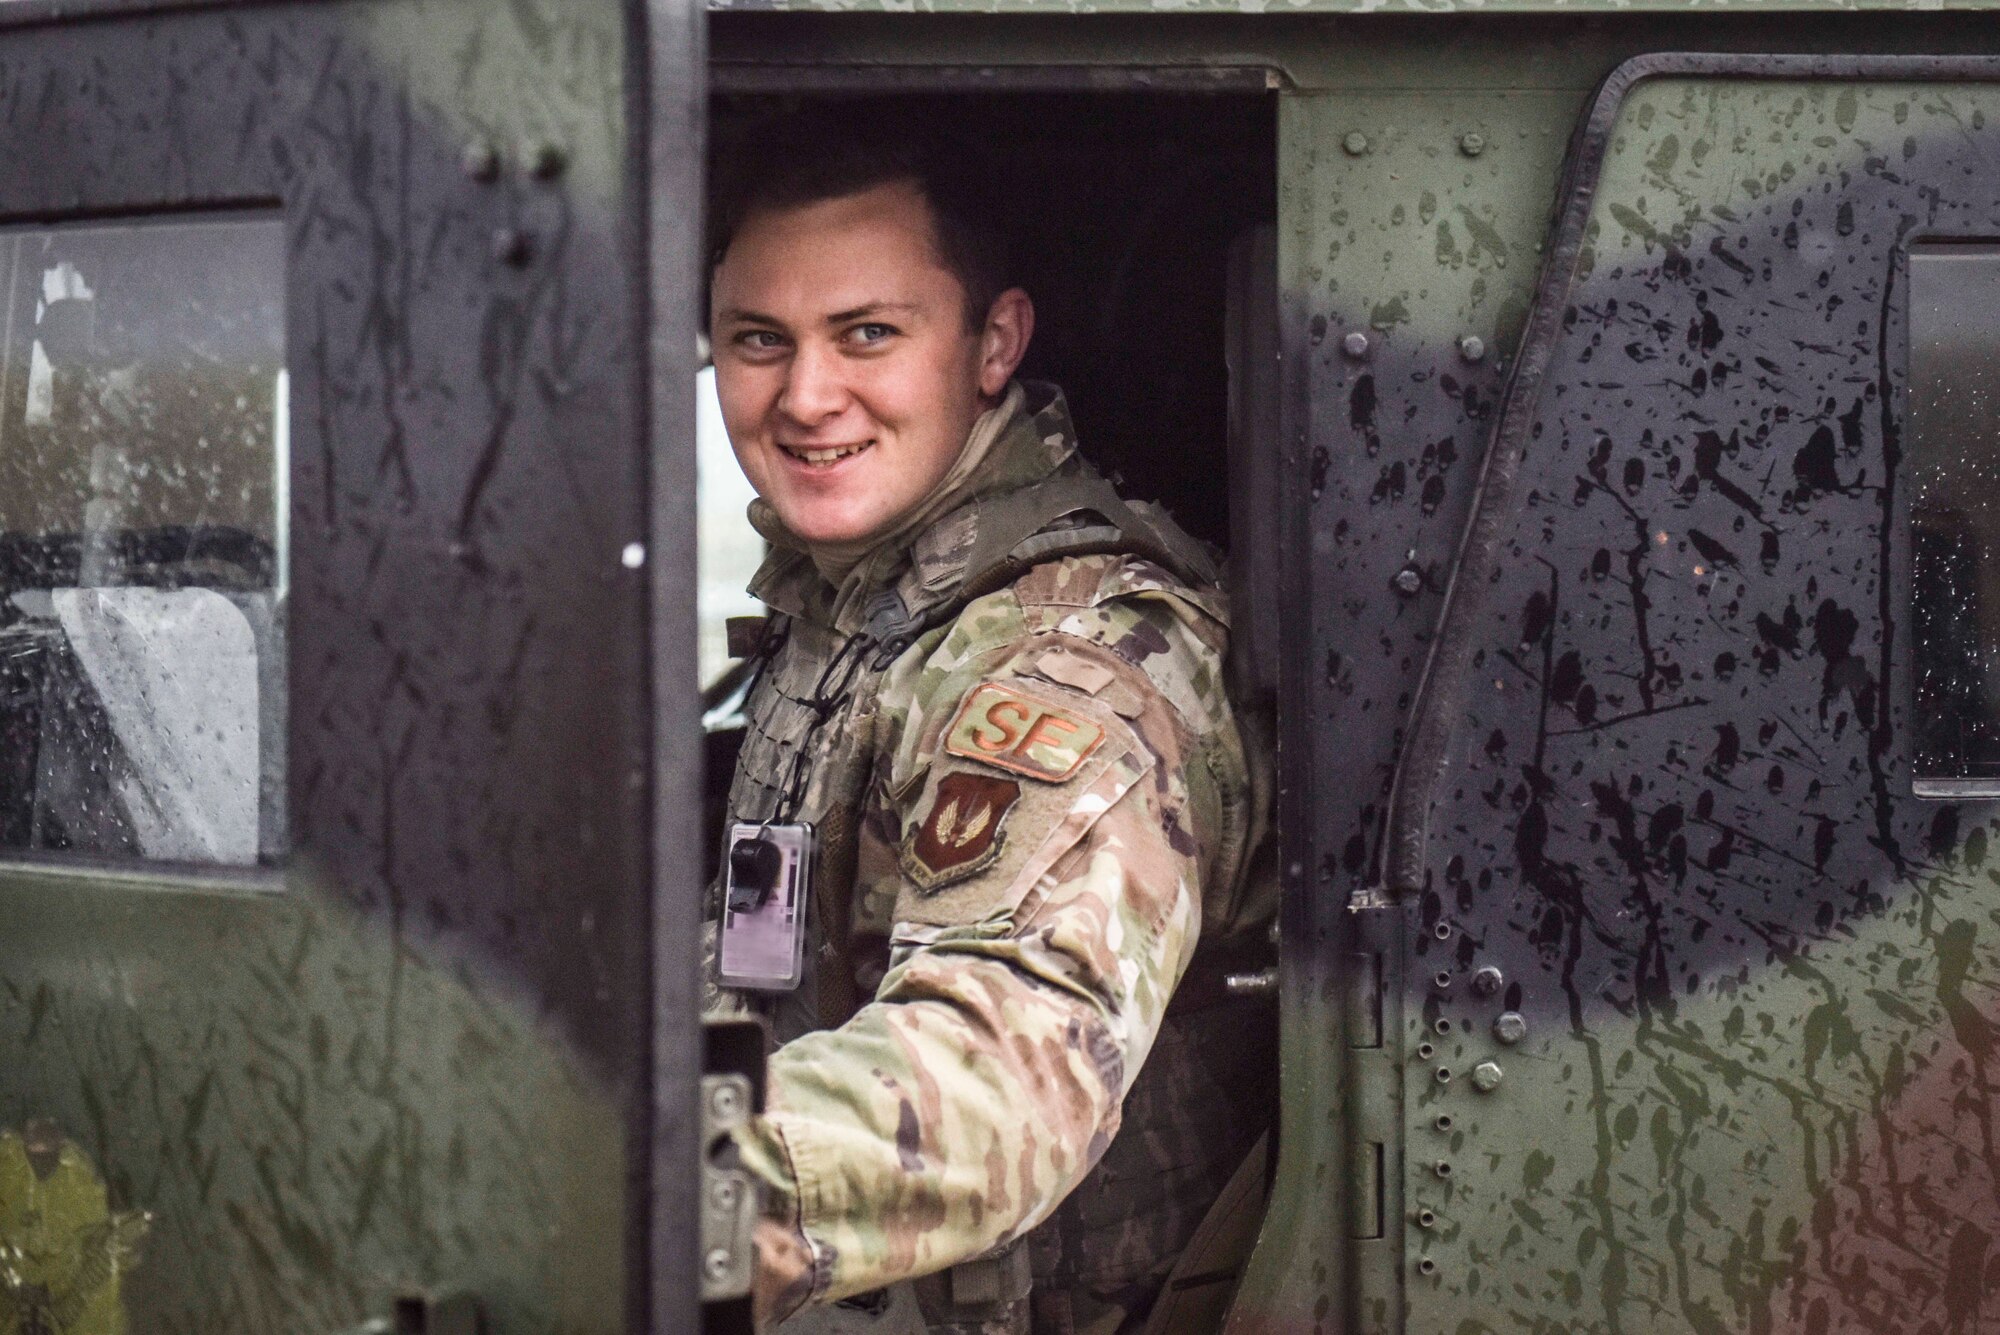 A member of the 39th Security Forces Squadron sits in a Humvee after an exercise Nov. 27, 2019, at Incirlik Air Base, Turkey. Security forces Airmen train frequently in order to continually improve their emergency response, and to maintain readiness for deployments and other missions. (U.S. Air Force photo by Staff Sgt. Joshua Magbanua)